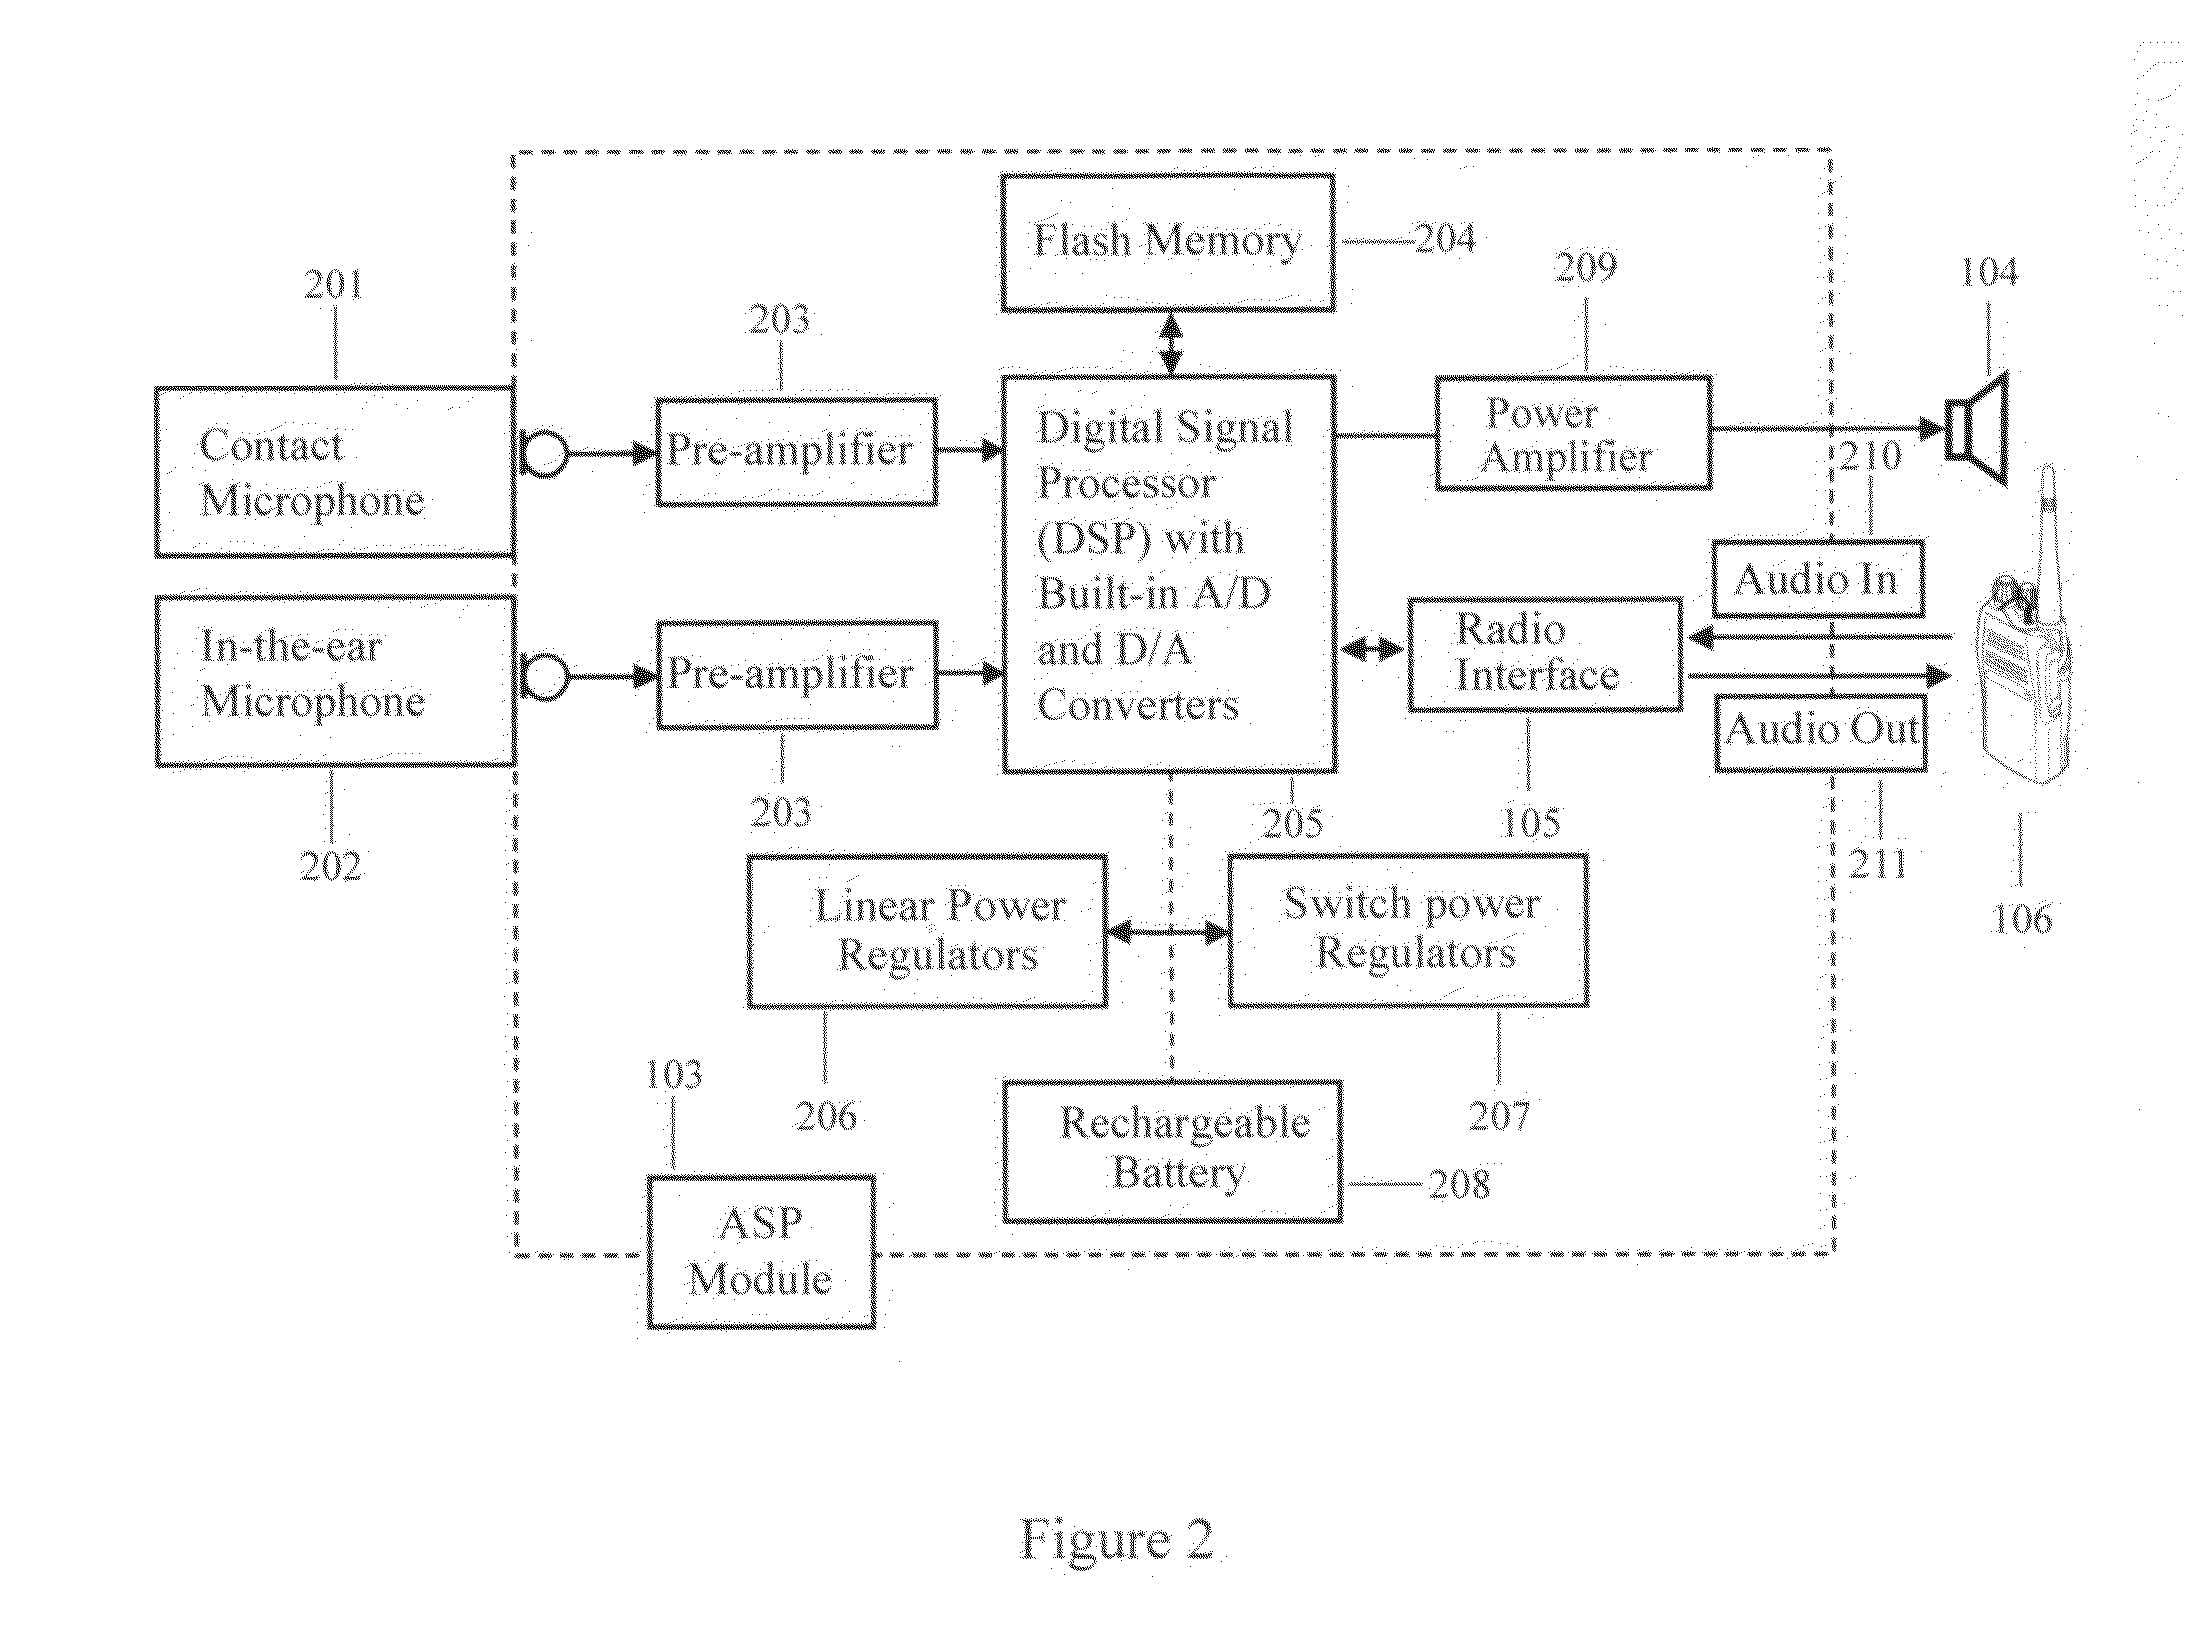 Noise cancellation device for communications in high noise environments